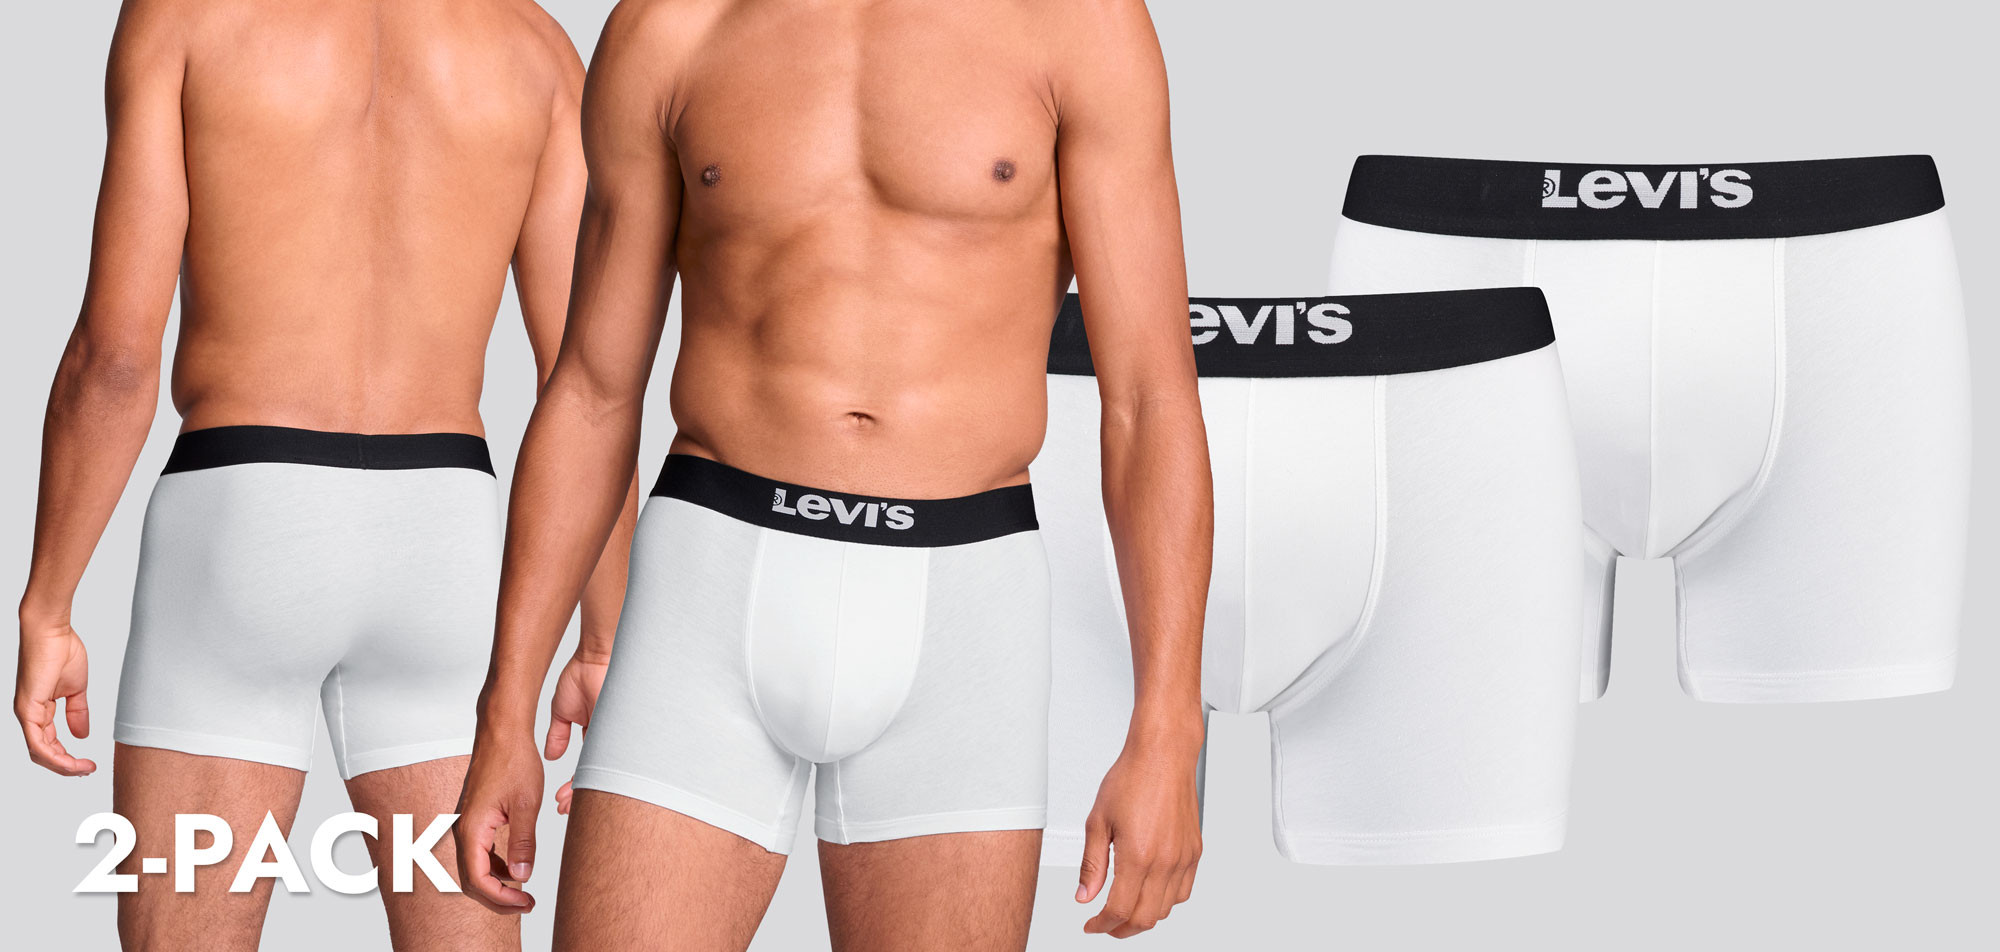 Levi_s Boxer Brief 2-Pack 842 Solid Basic, color Nee